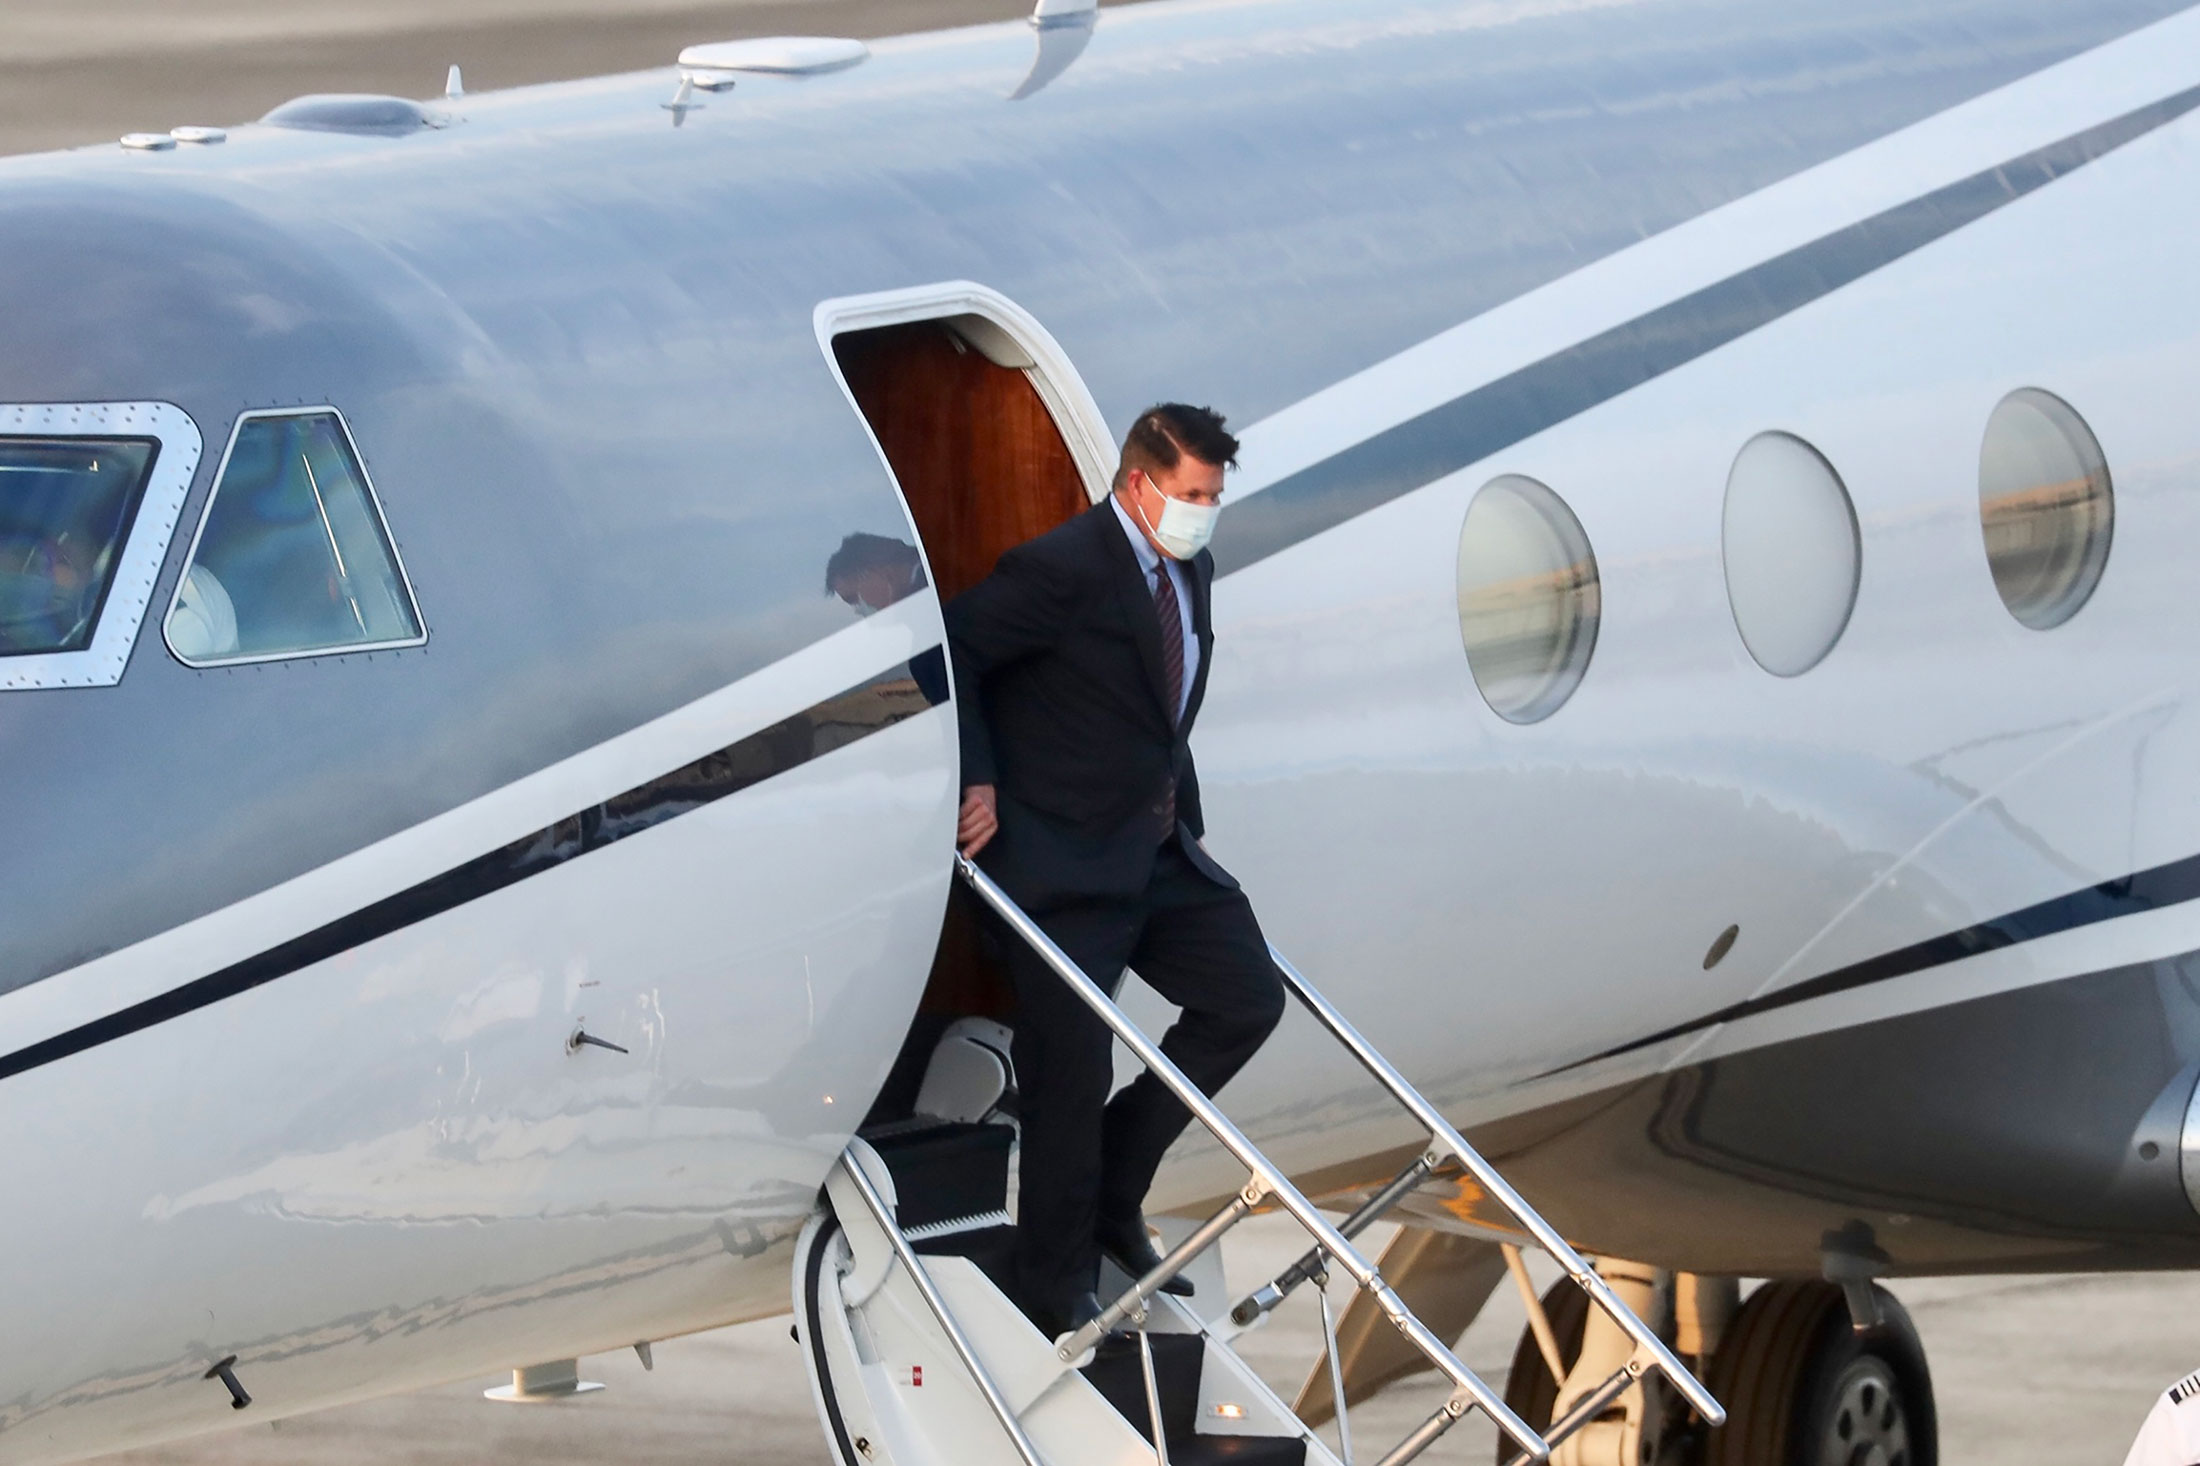 Keith Krach, U.S undersecretary of state for economic growth, energy, and the environment, descends&nbsp;after landing at the Sungshan airport in Taipei in September.